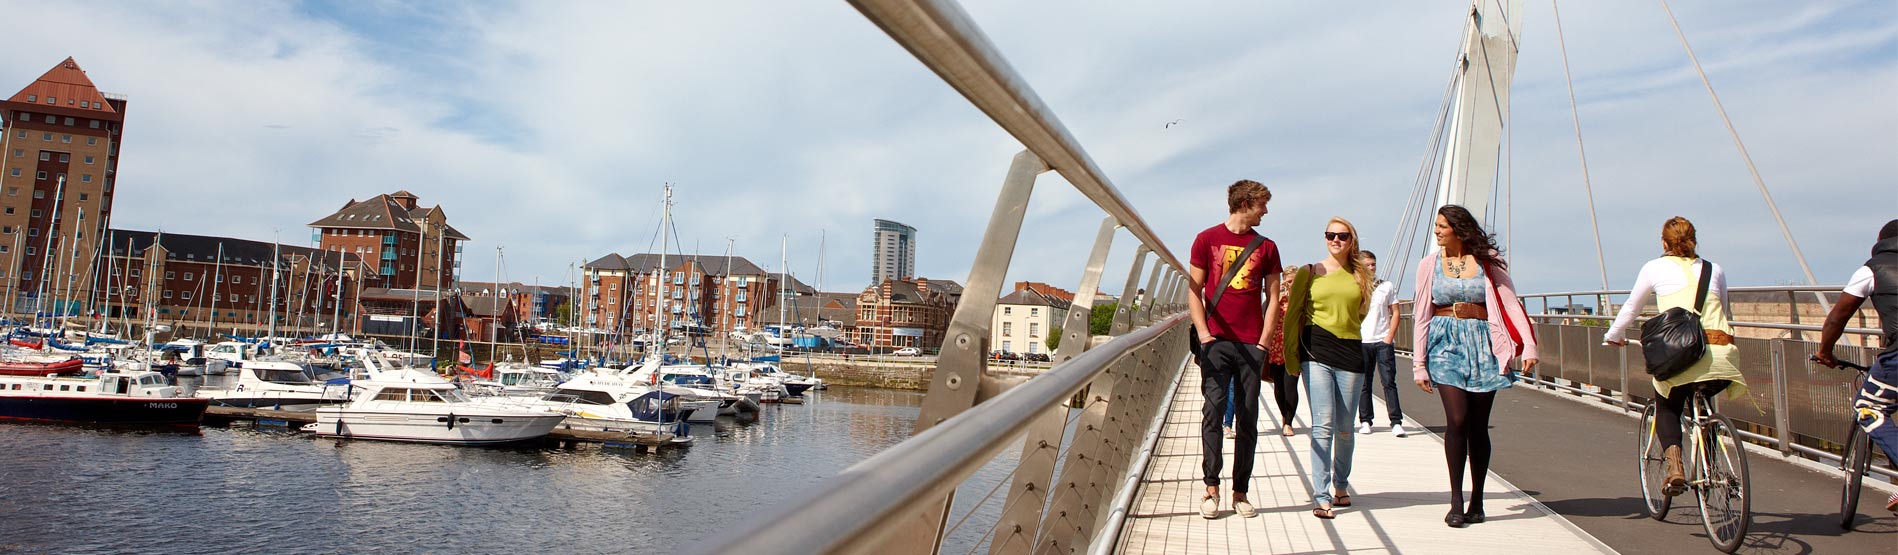 People walking over the bridge in SA1, Swansea with the Marina in the Background